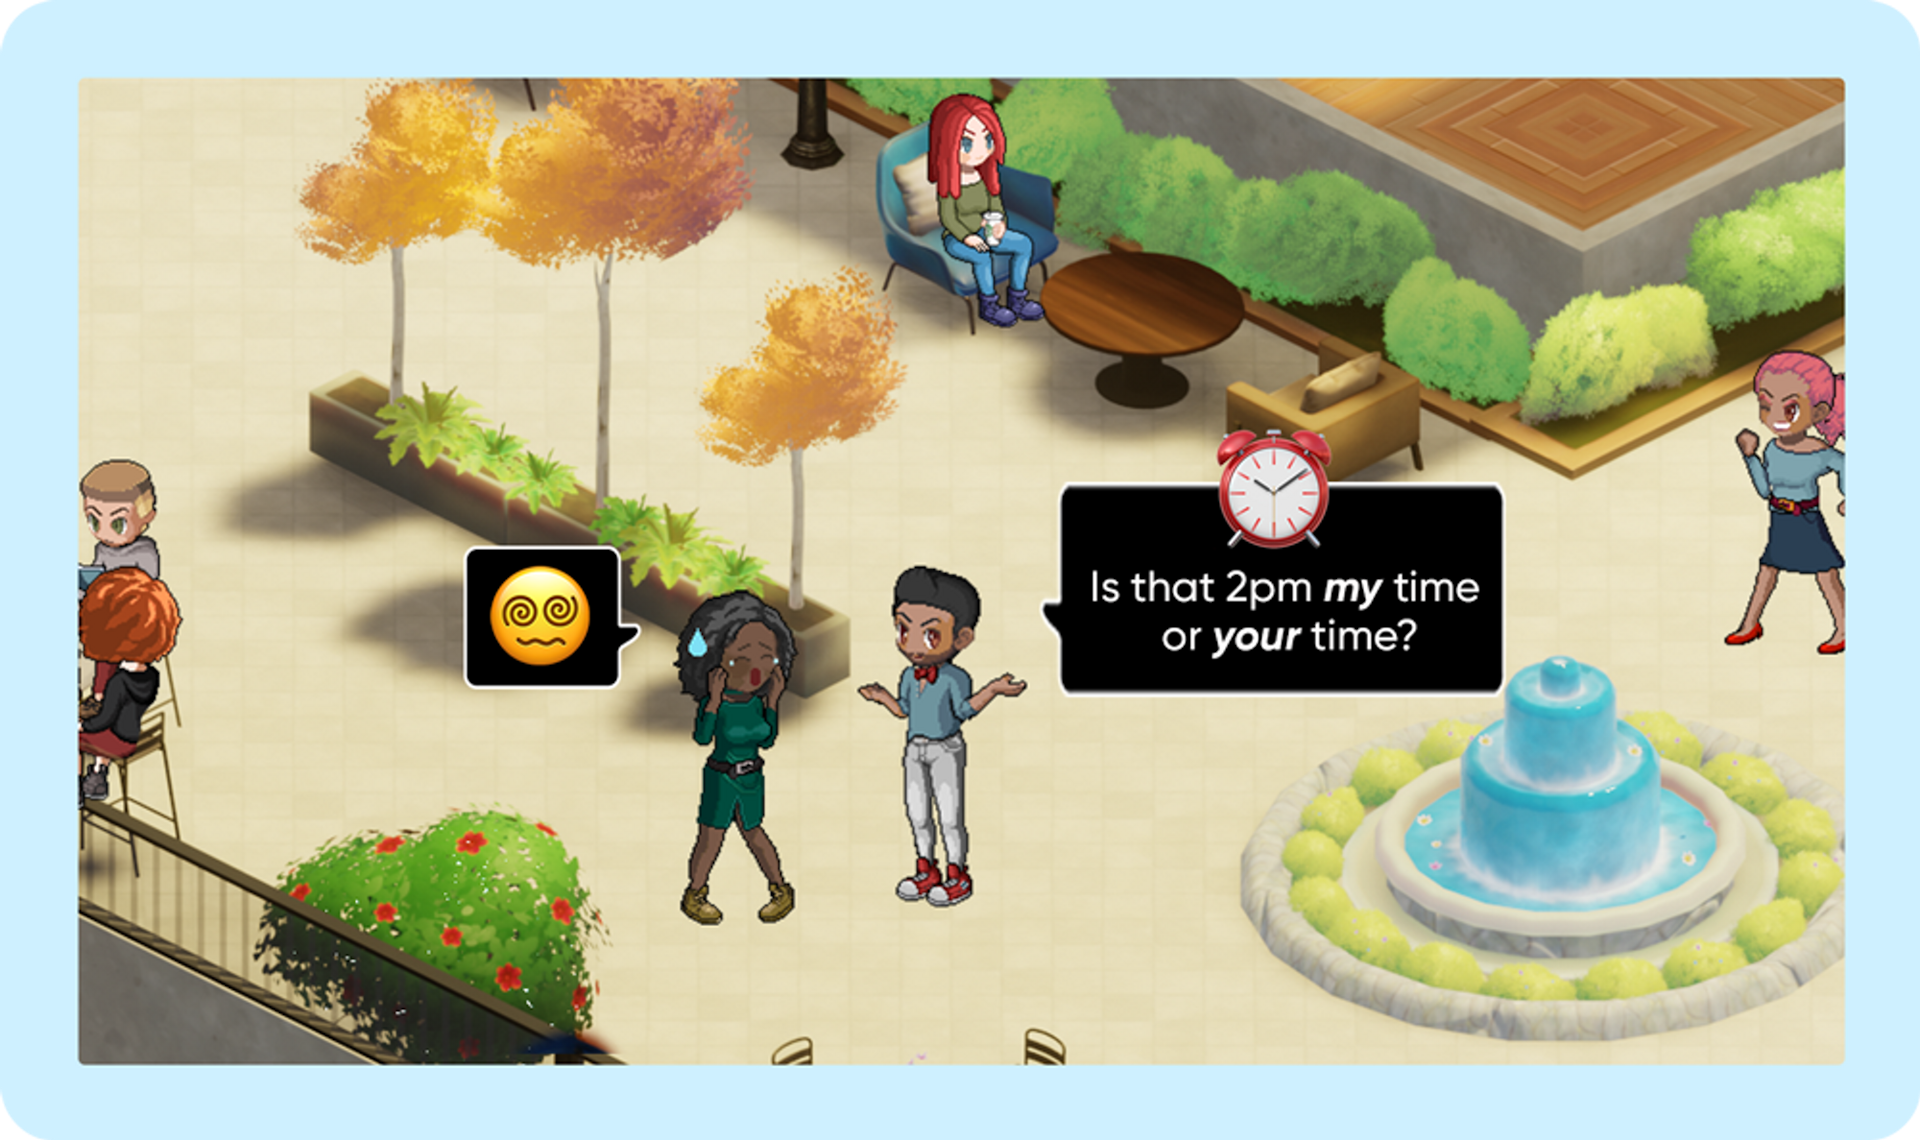 Two avatars standing in an office talking about a meeting time.